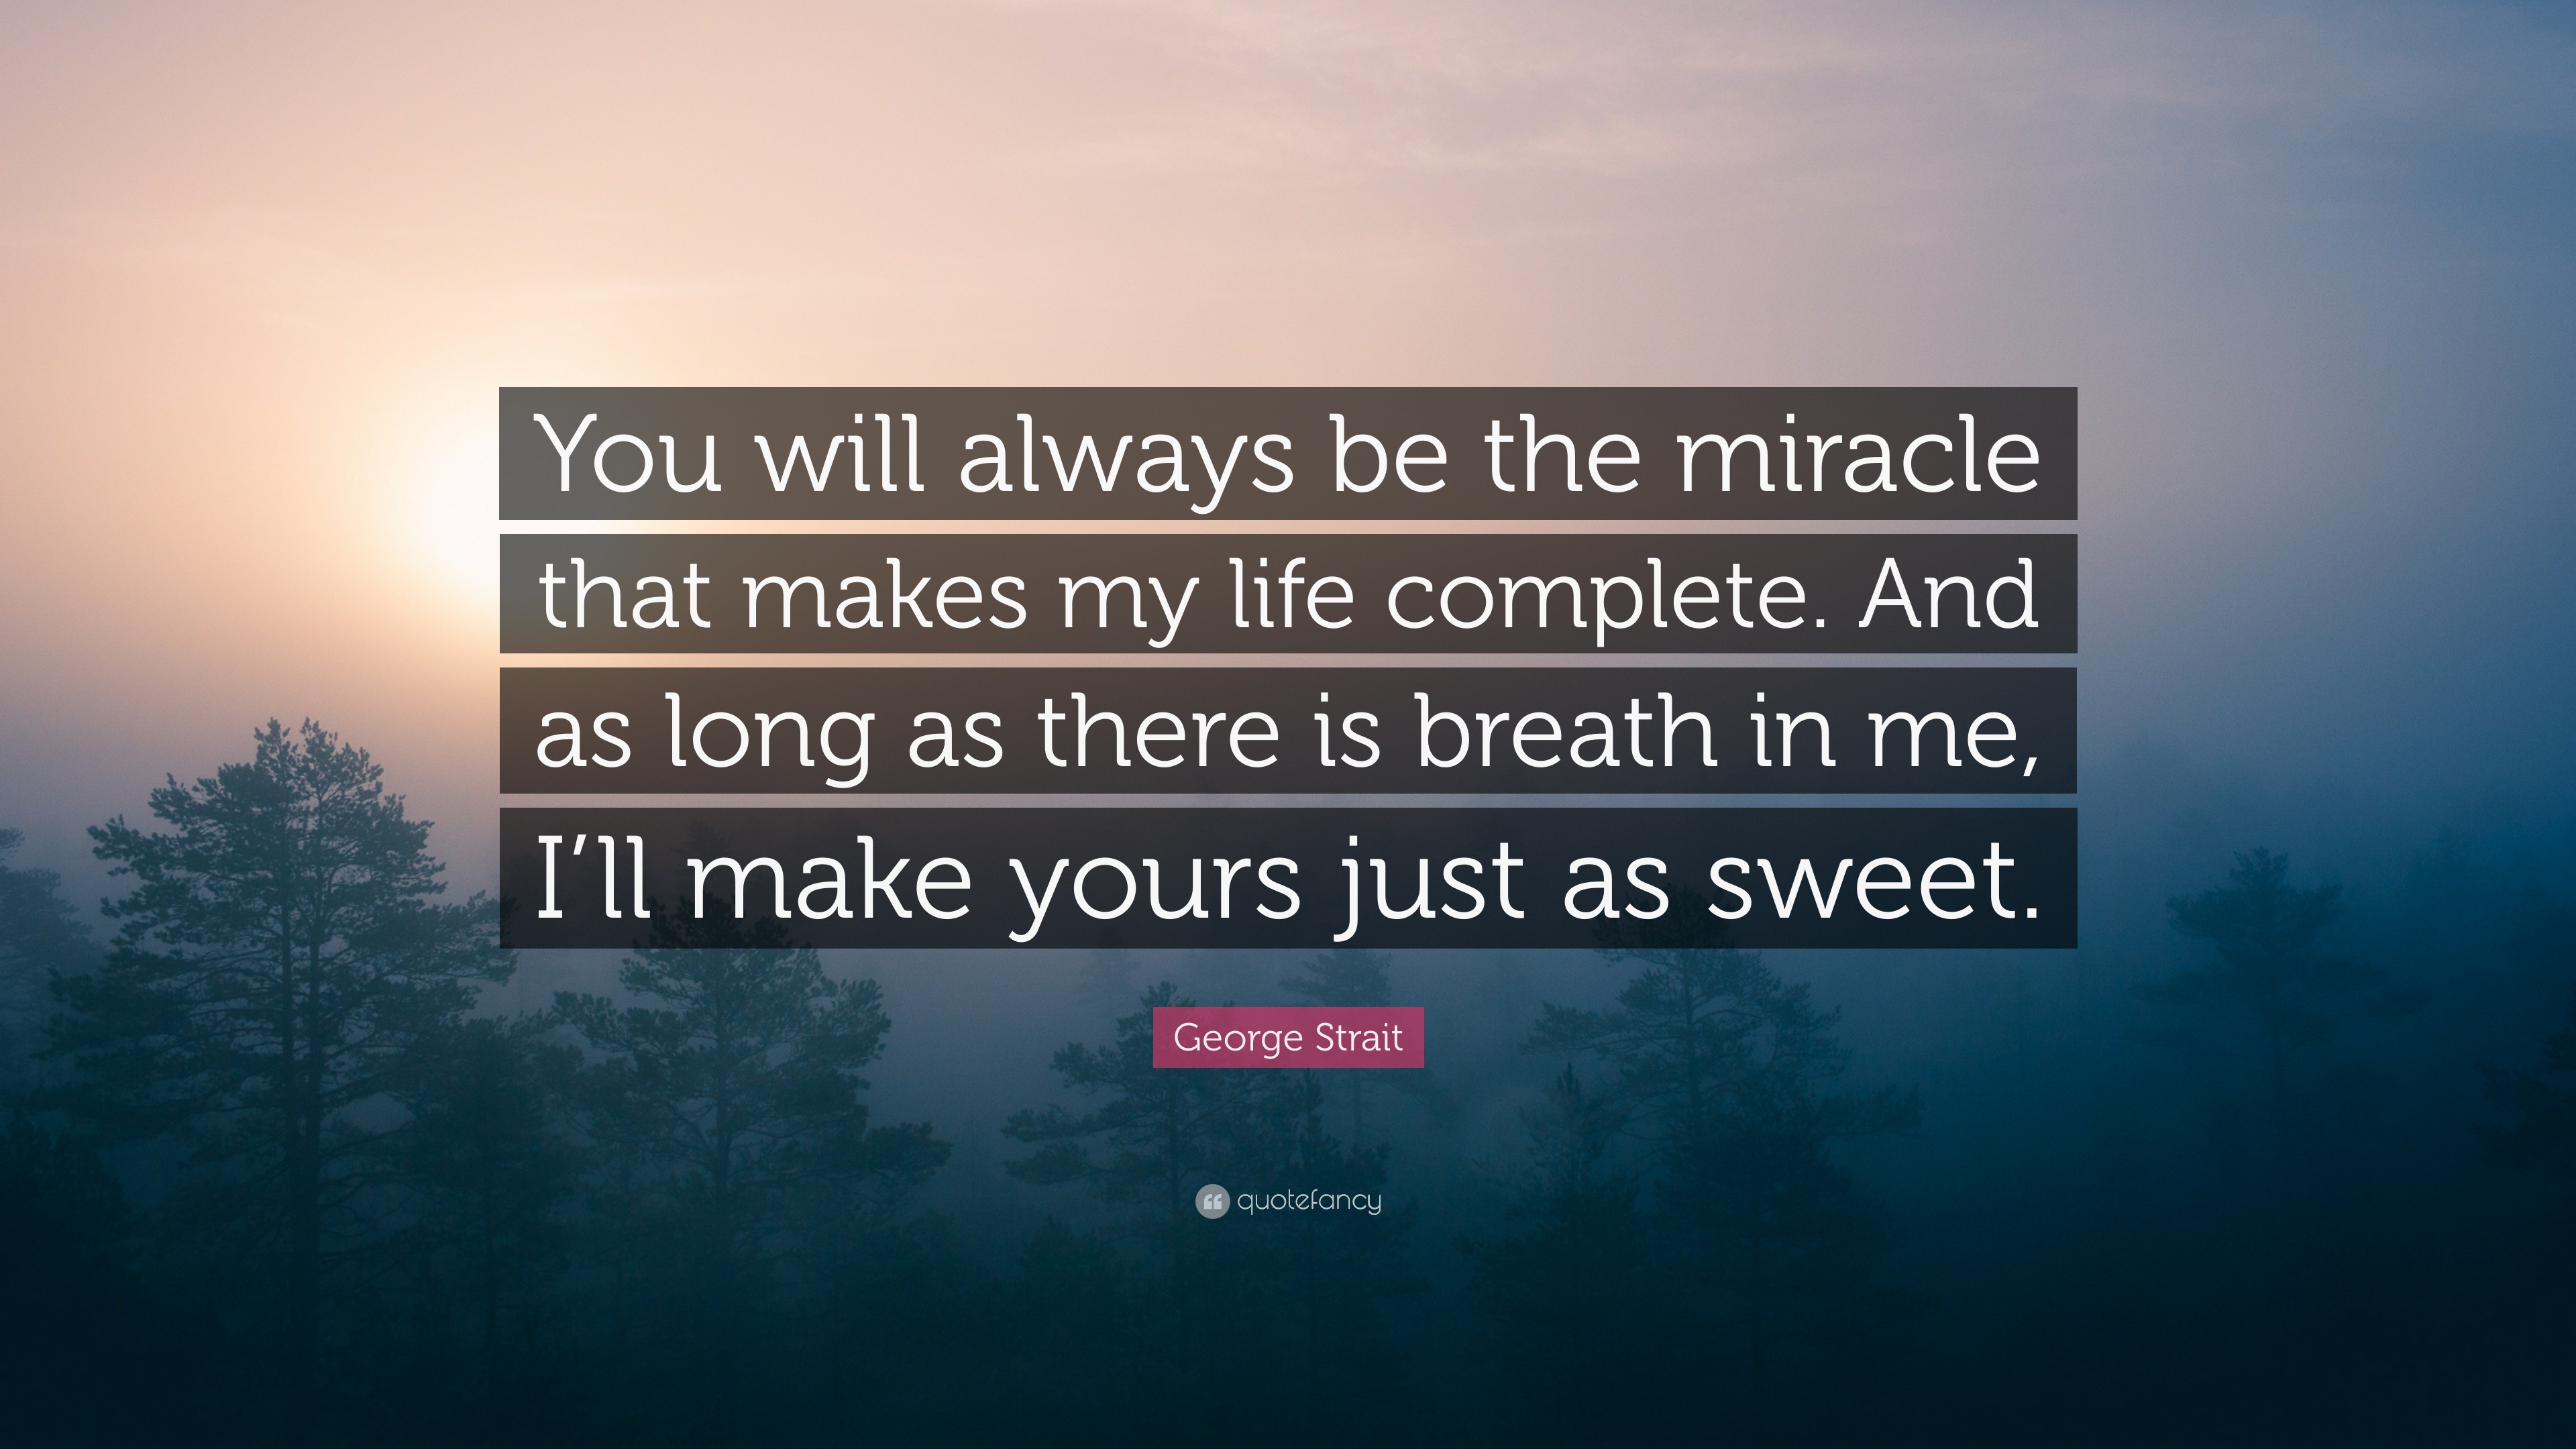 George Strait Quote: "You will always be the miracle that ...